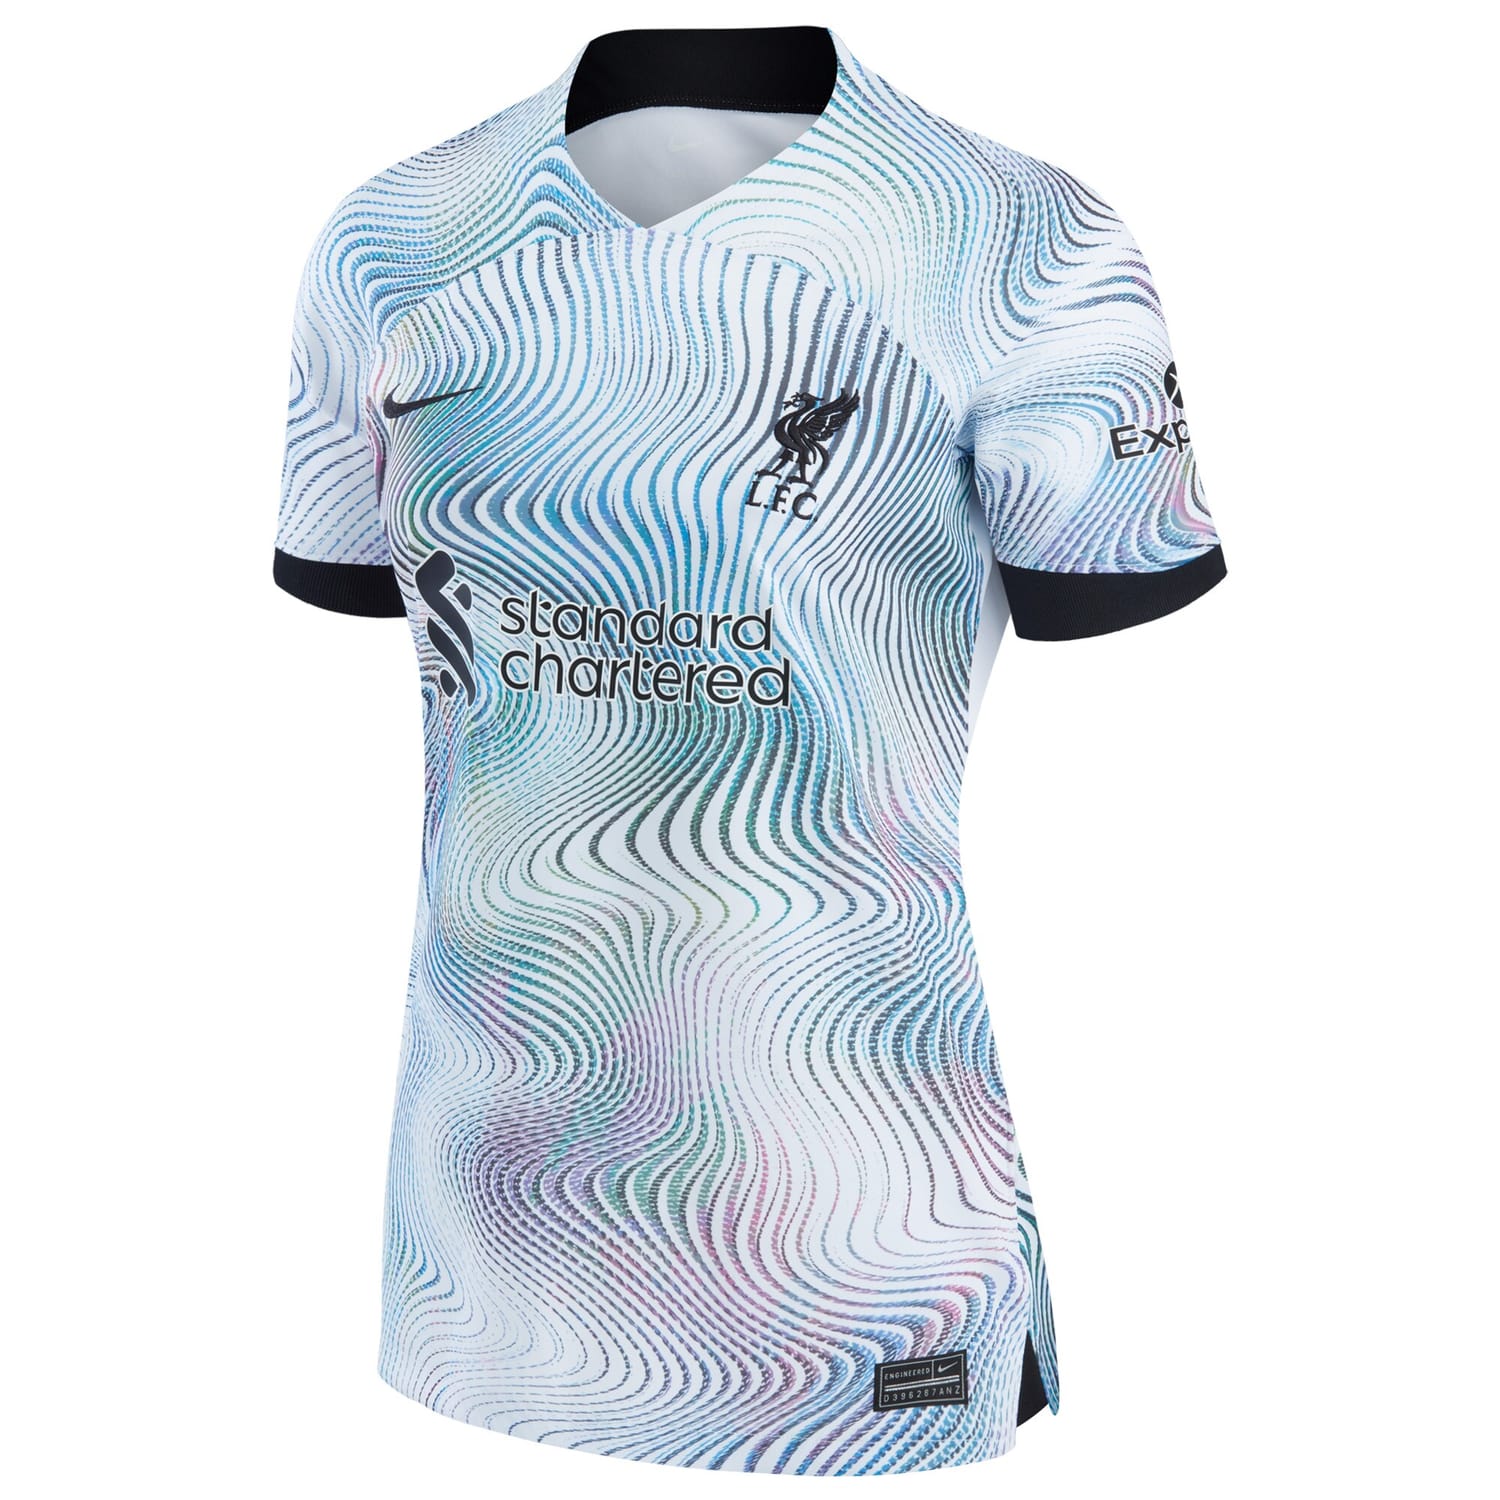 Premier League Liverpool Away Jersey Shirt 2022-23 player Milner 7 printing for Women